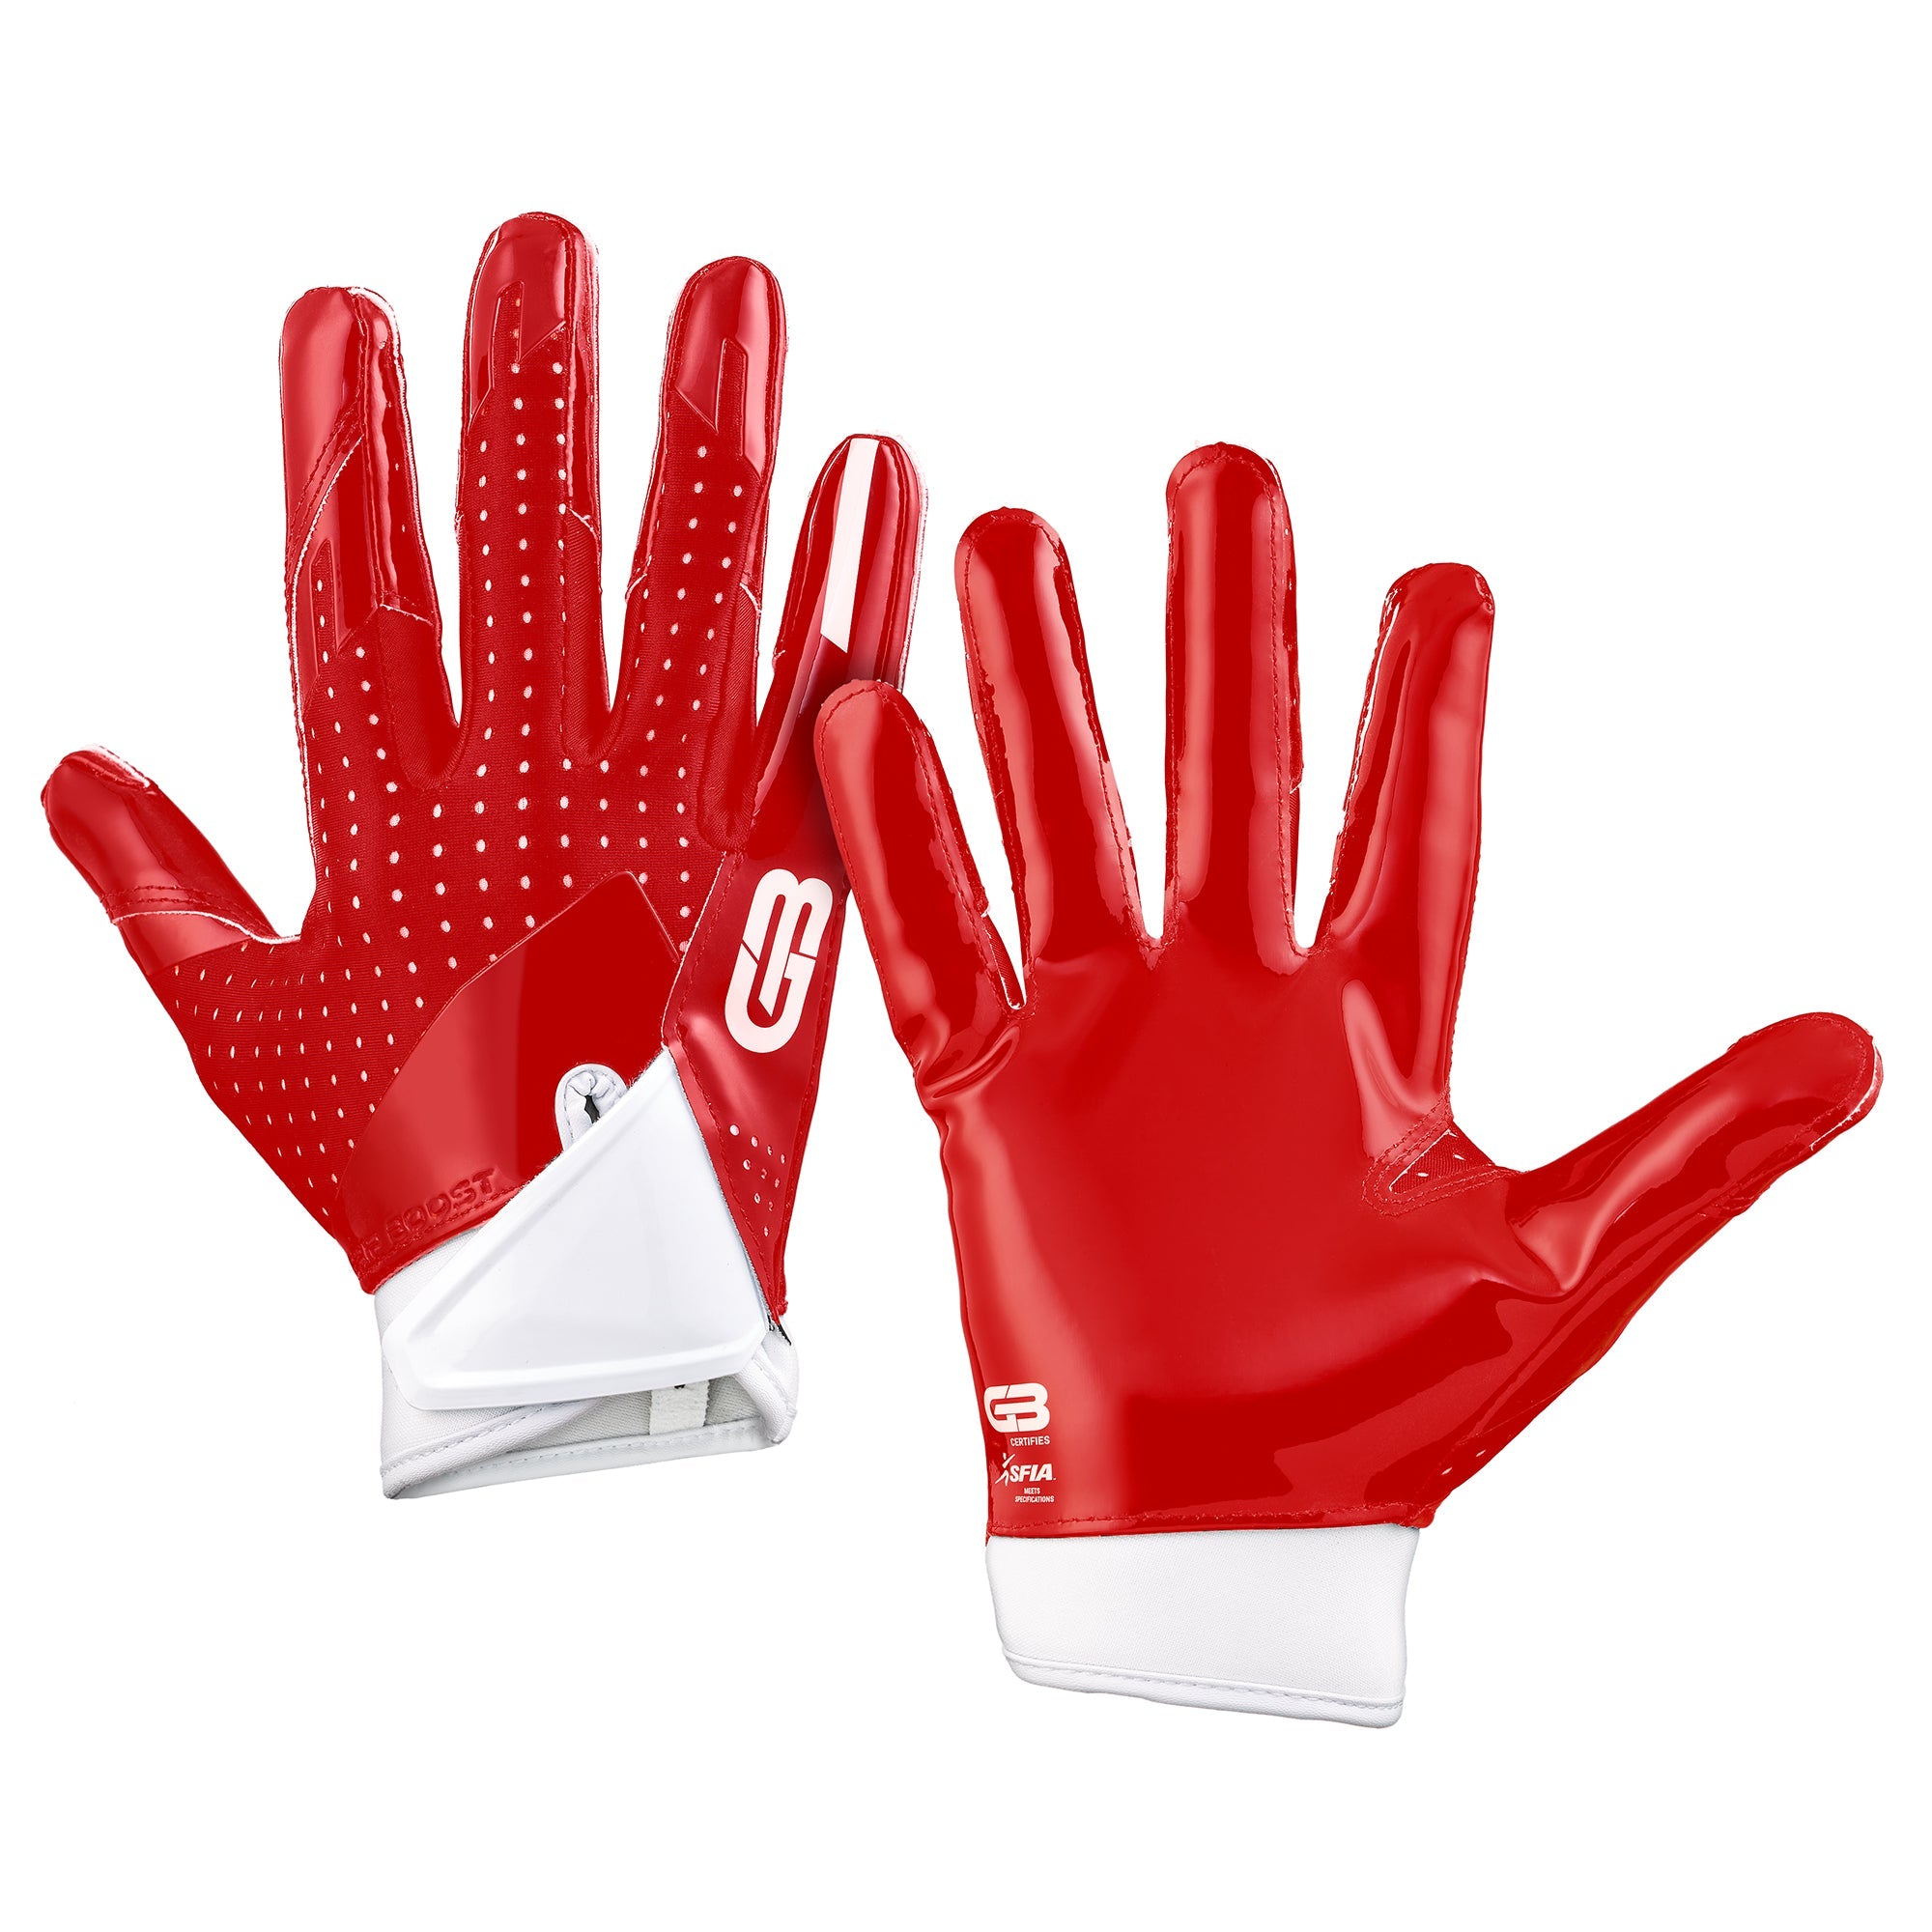 Grip Boost Stealth Solid Color Football Gloves Pro Elite - Adult (Red/White, Small)